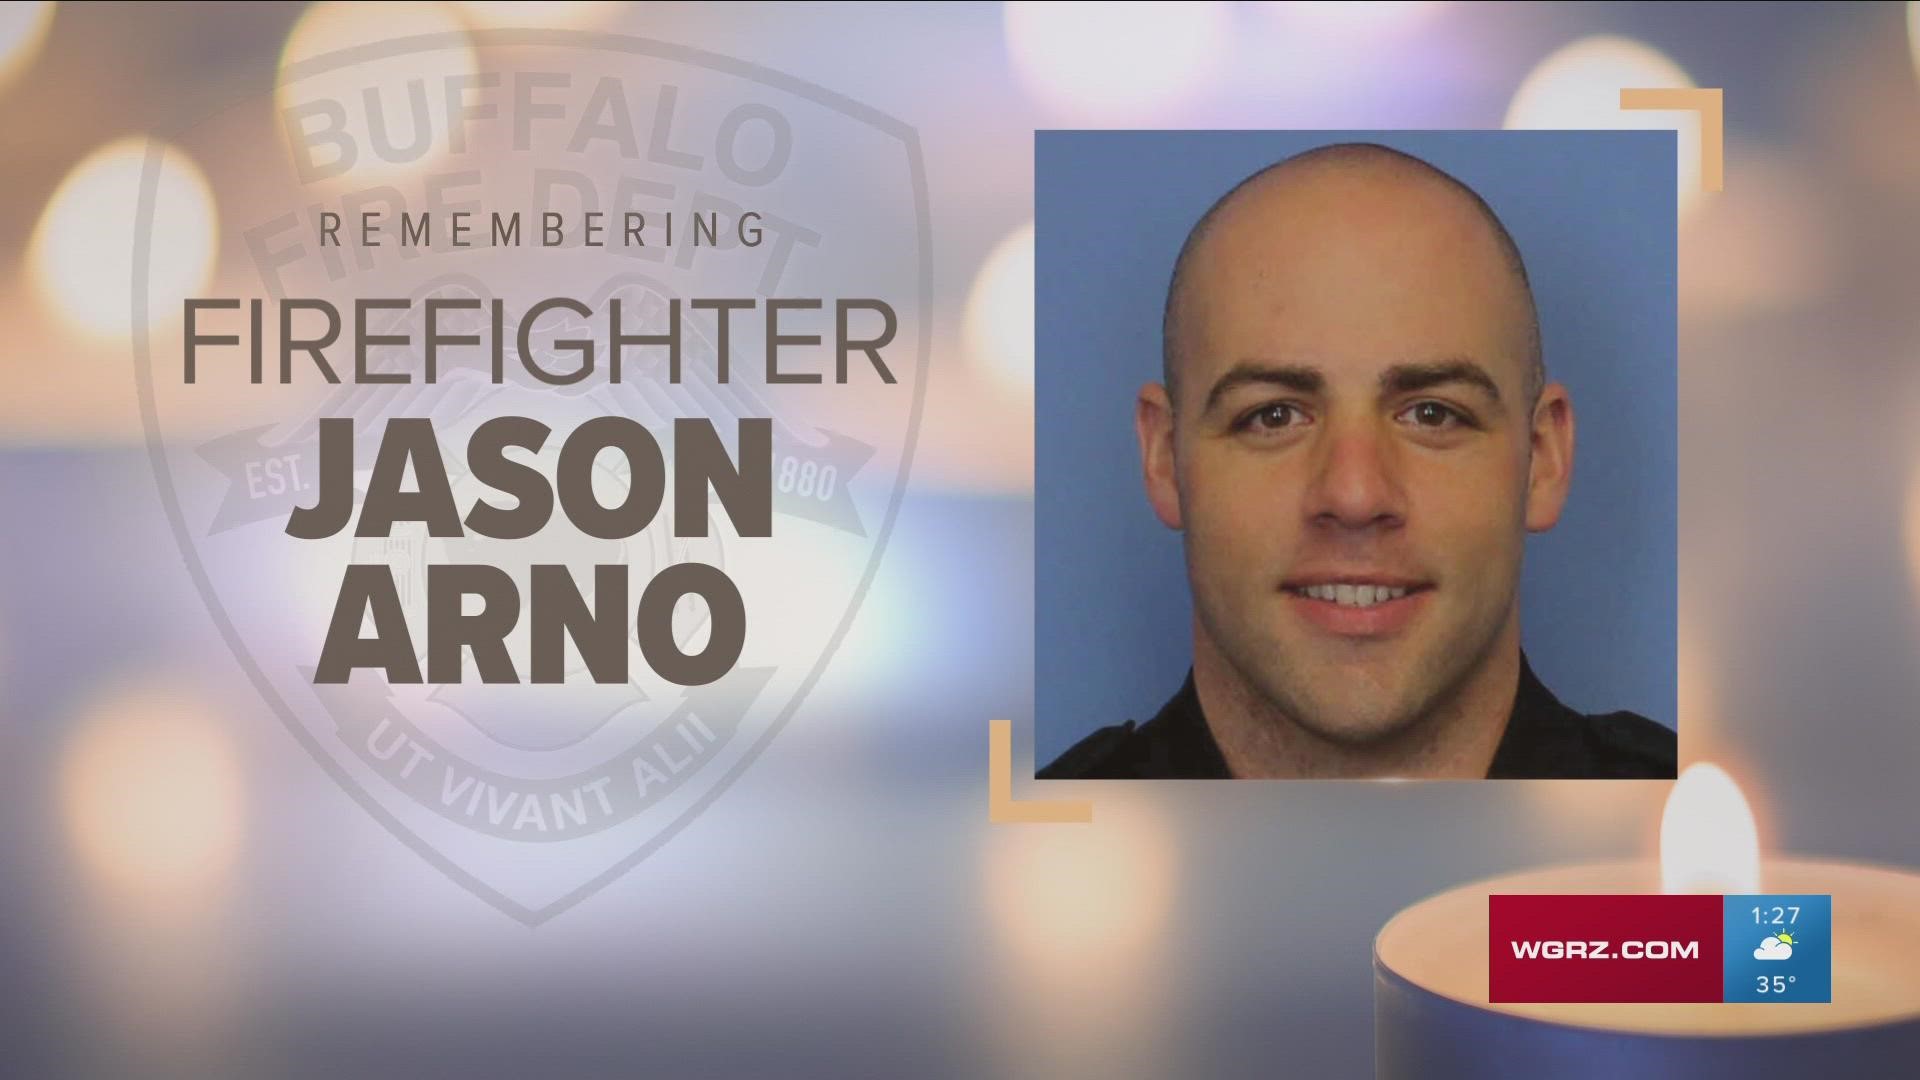 "Just a bright, young man with everything in front of him," Buffalo Fire Commissioner William Renaldo said.